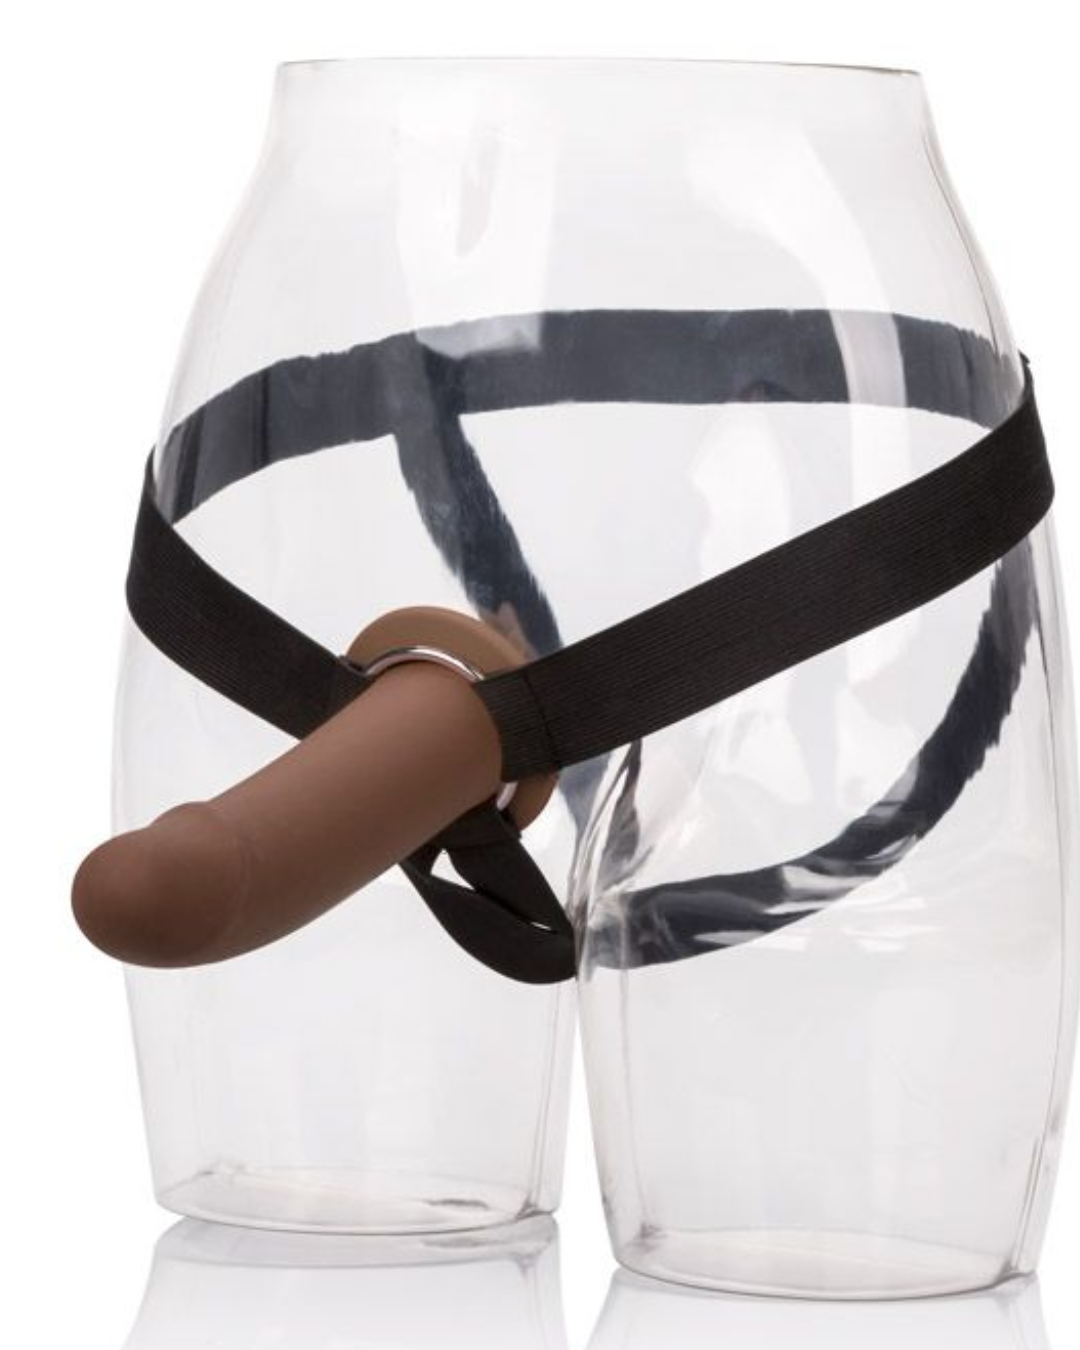 Hollow Penis Extension Strap-On with Jock Strap Harness